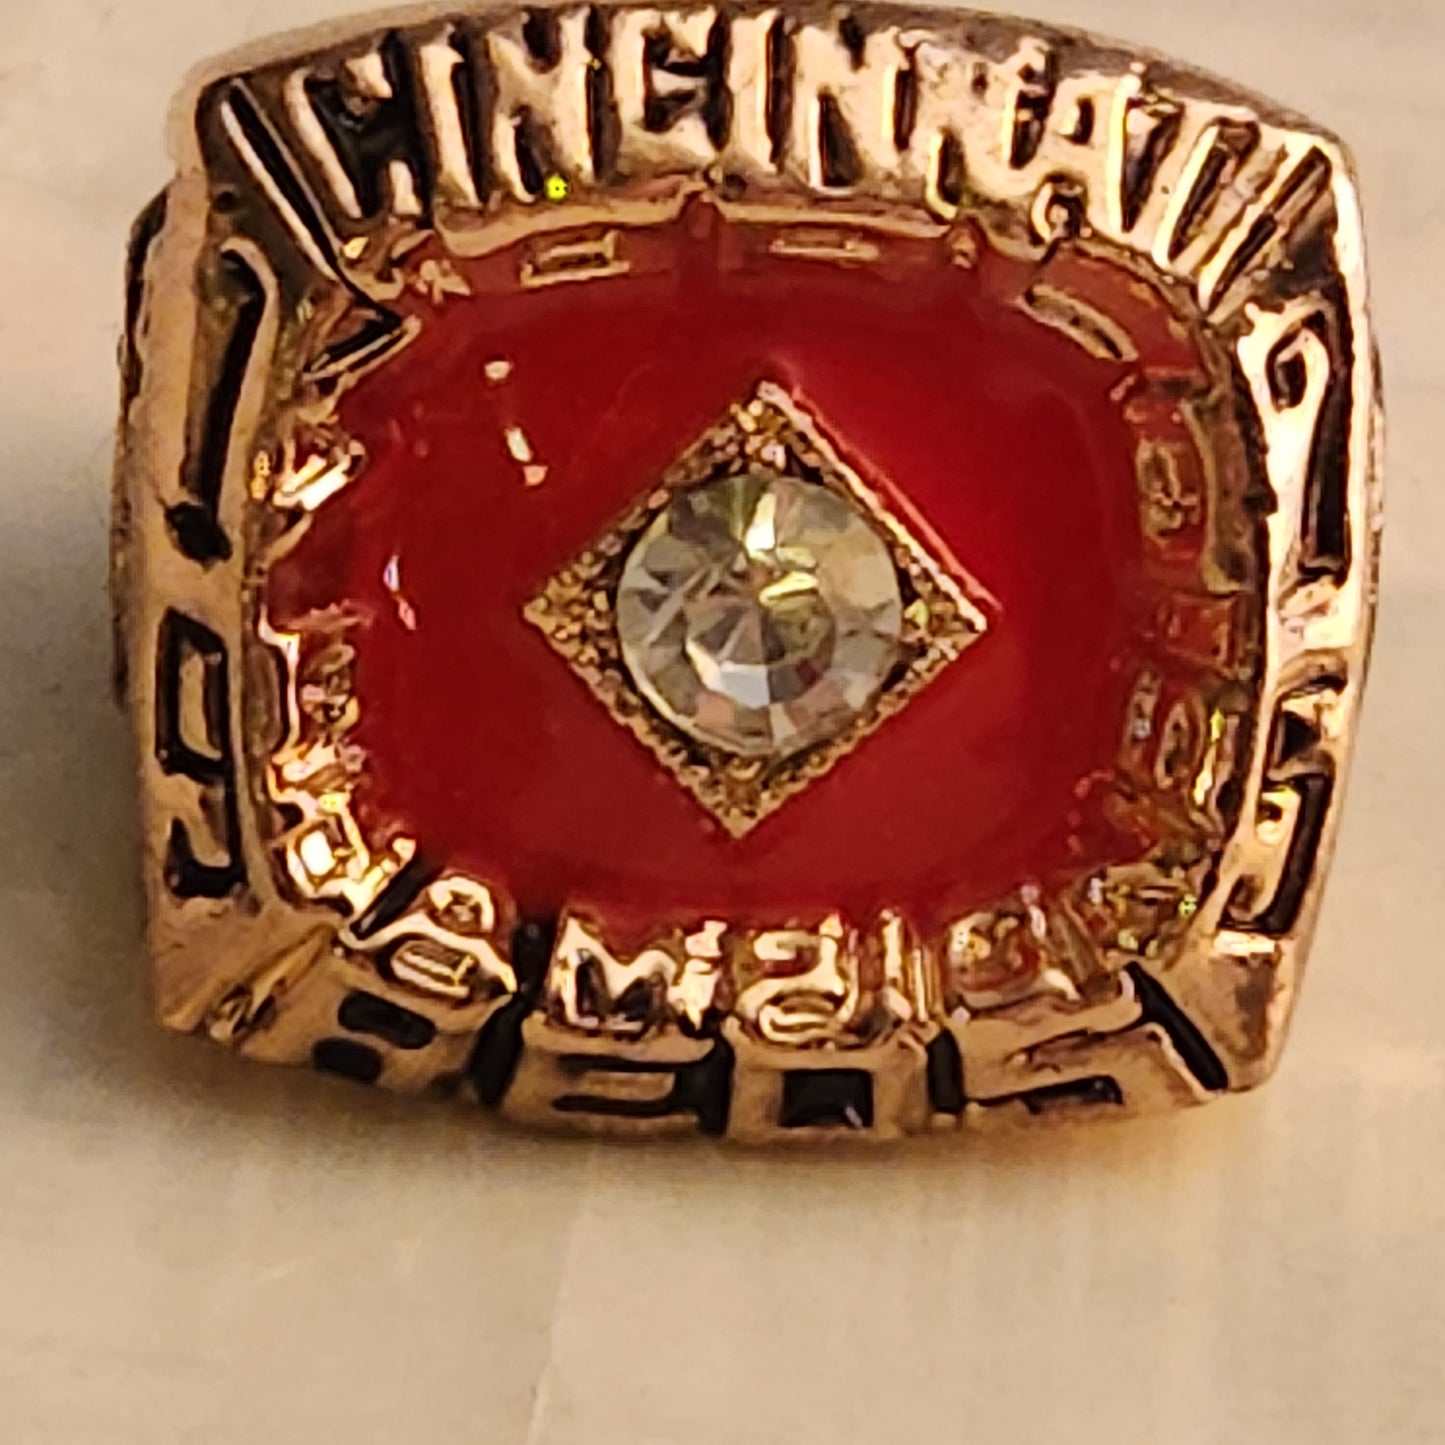 REDS 75 W.S. RINGS